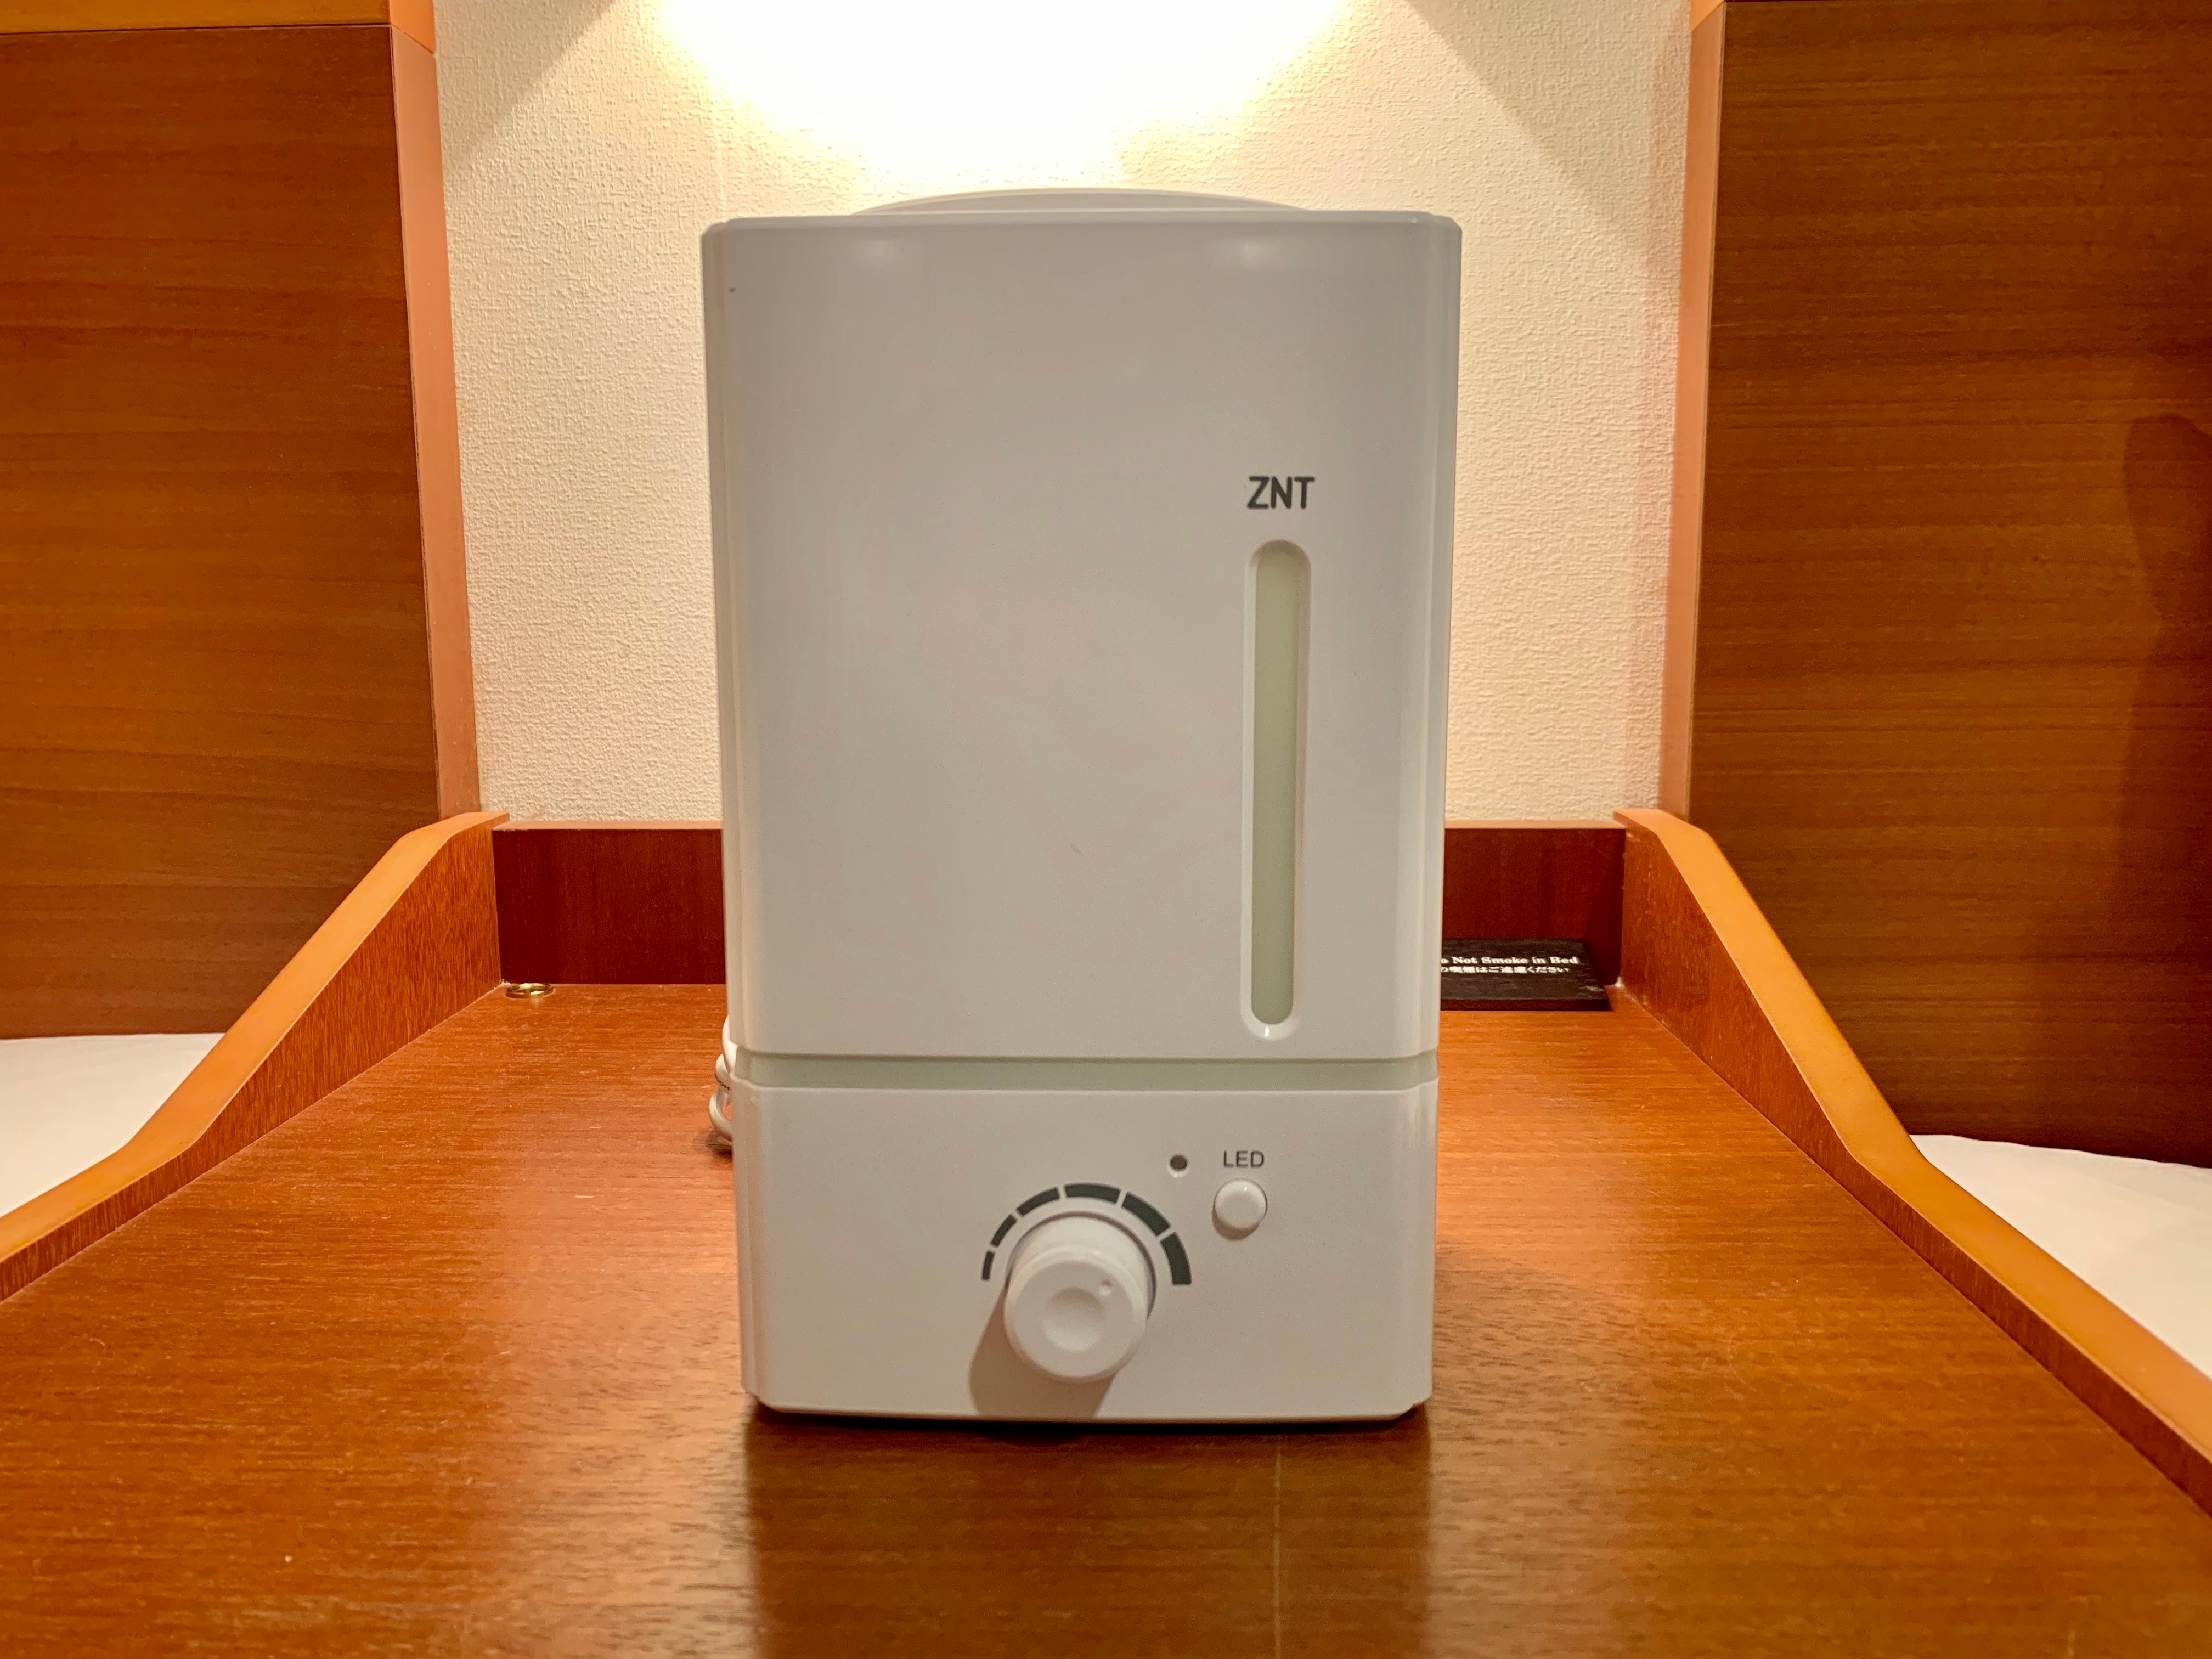 The twin room is equipped with a humidifier permanently.